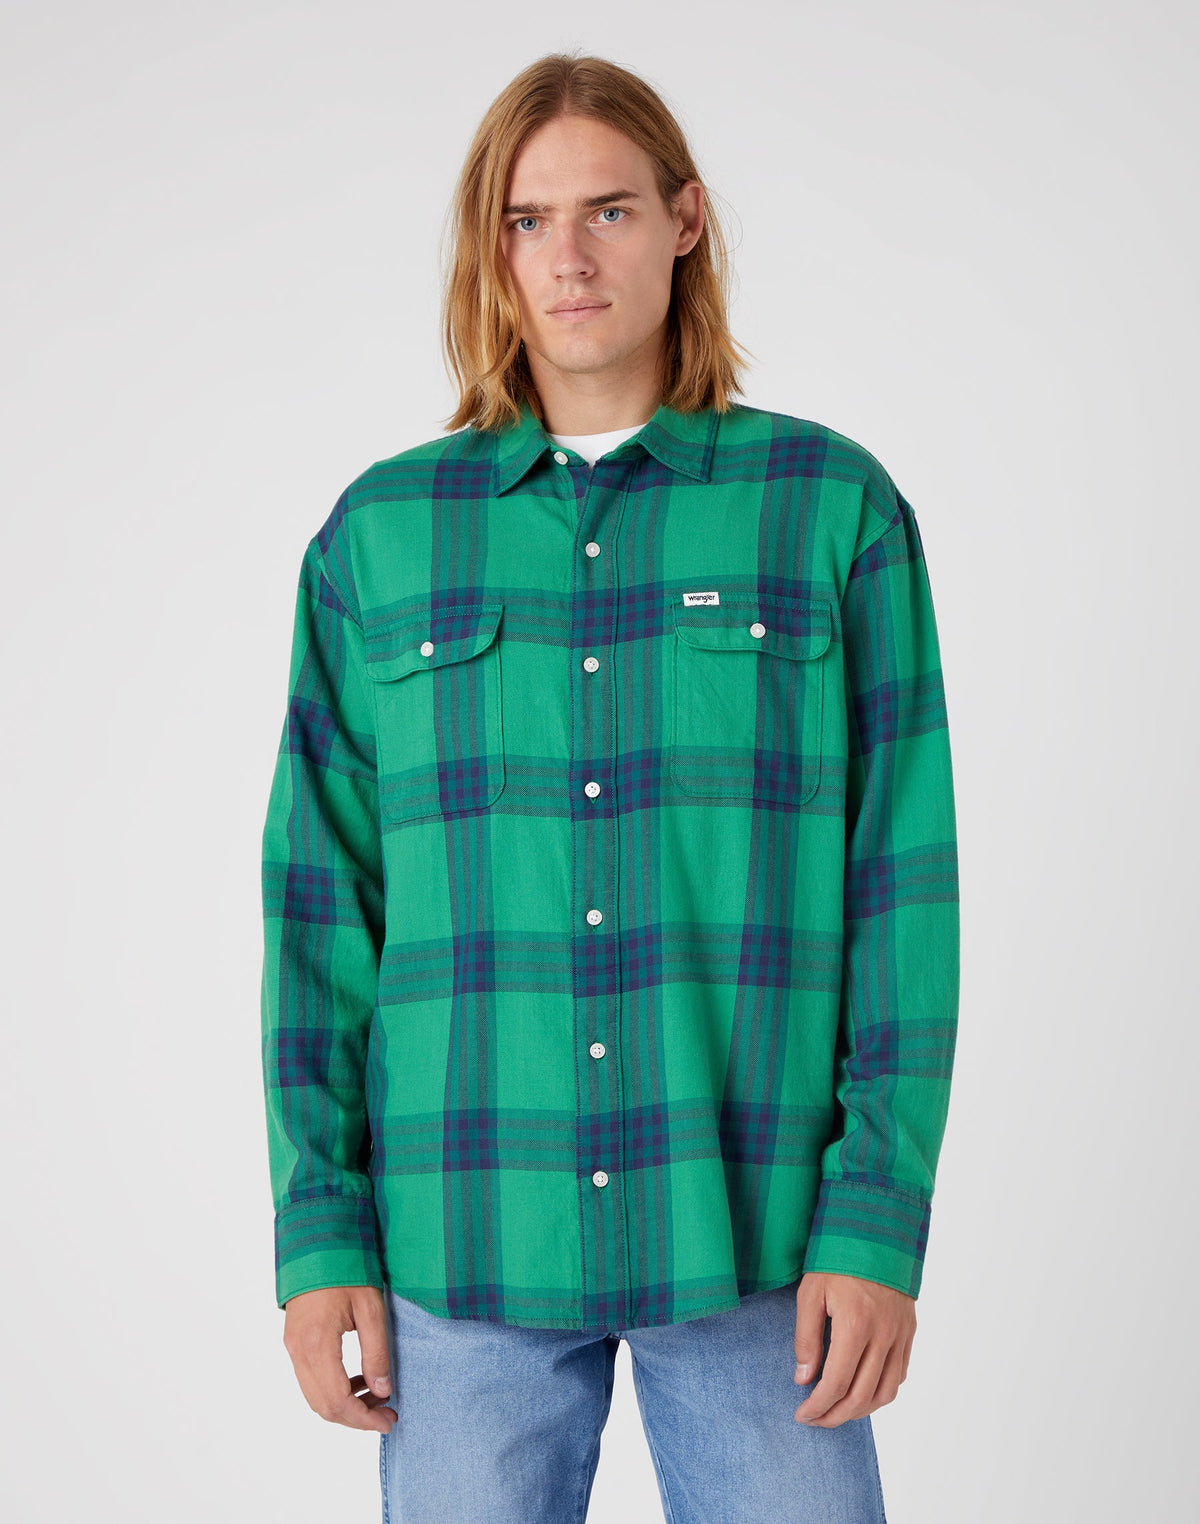 Patch Pocket Shirt in Pine Green